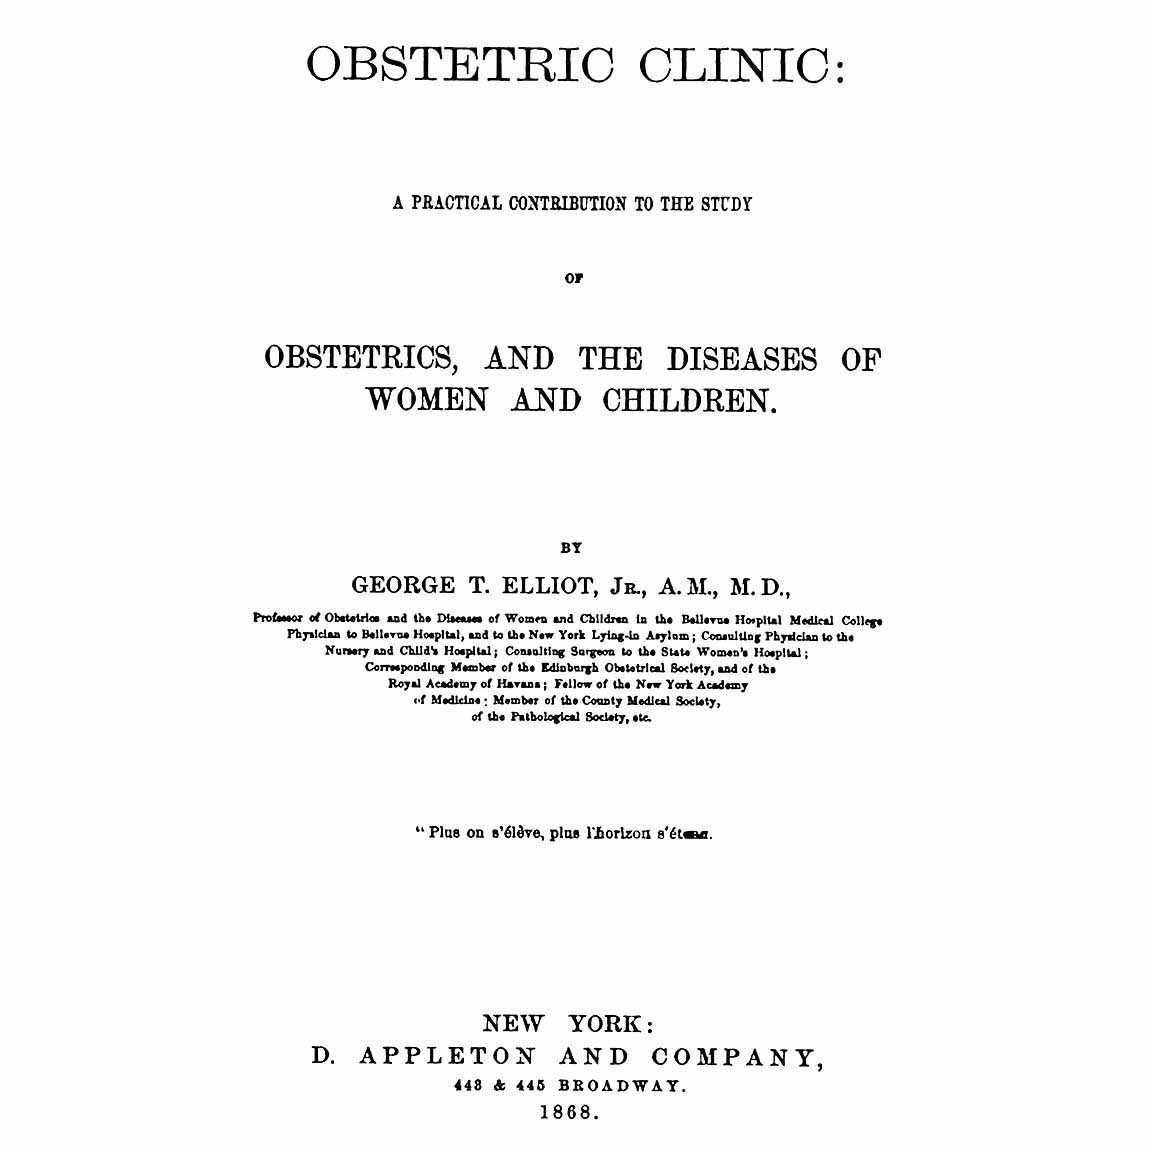 1868-ELLIOT-Obstetric-Clinic-title